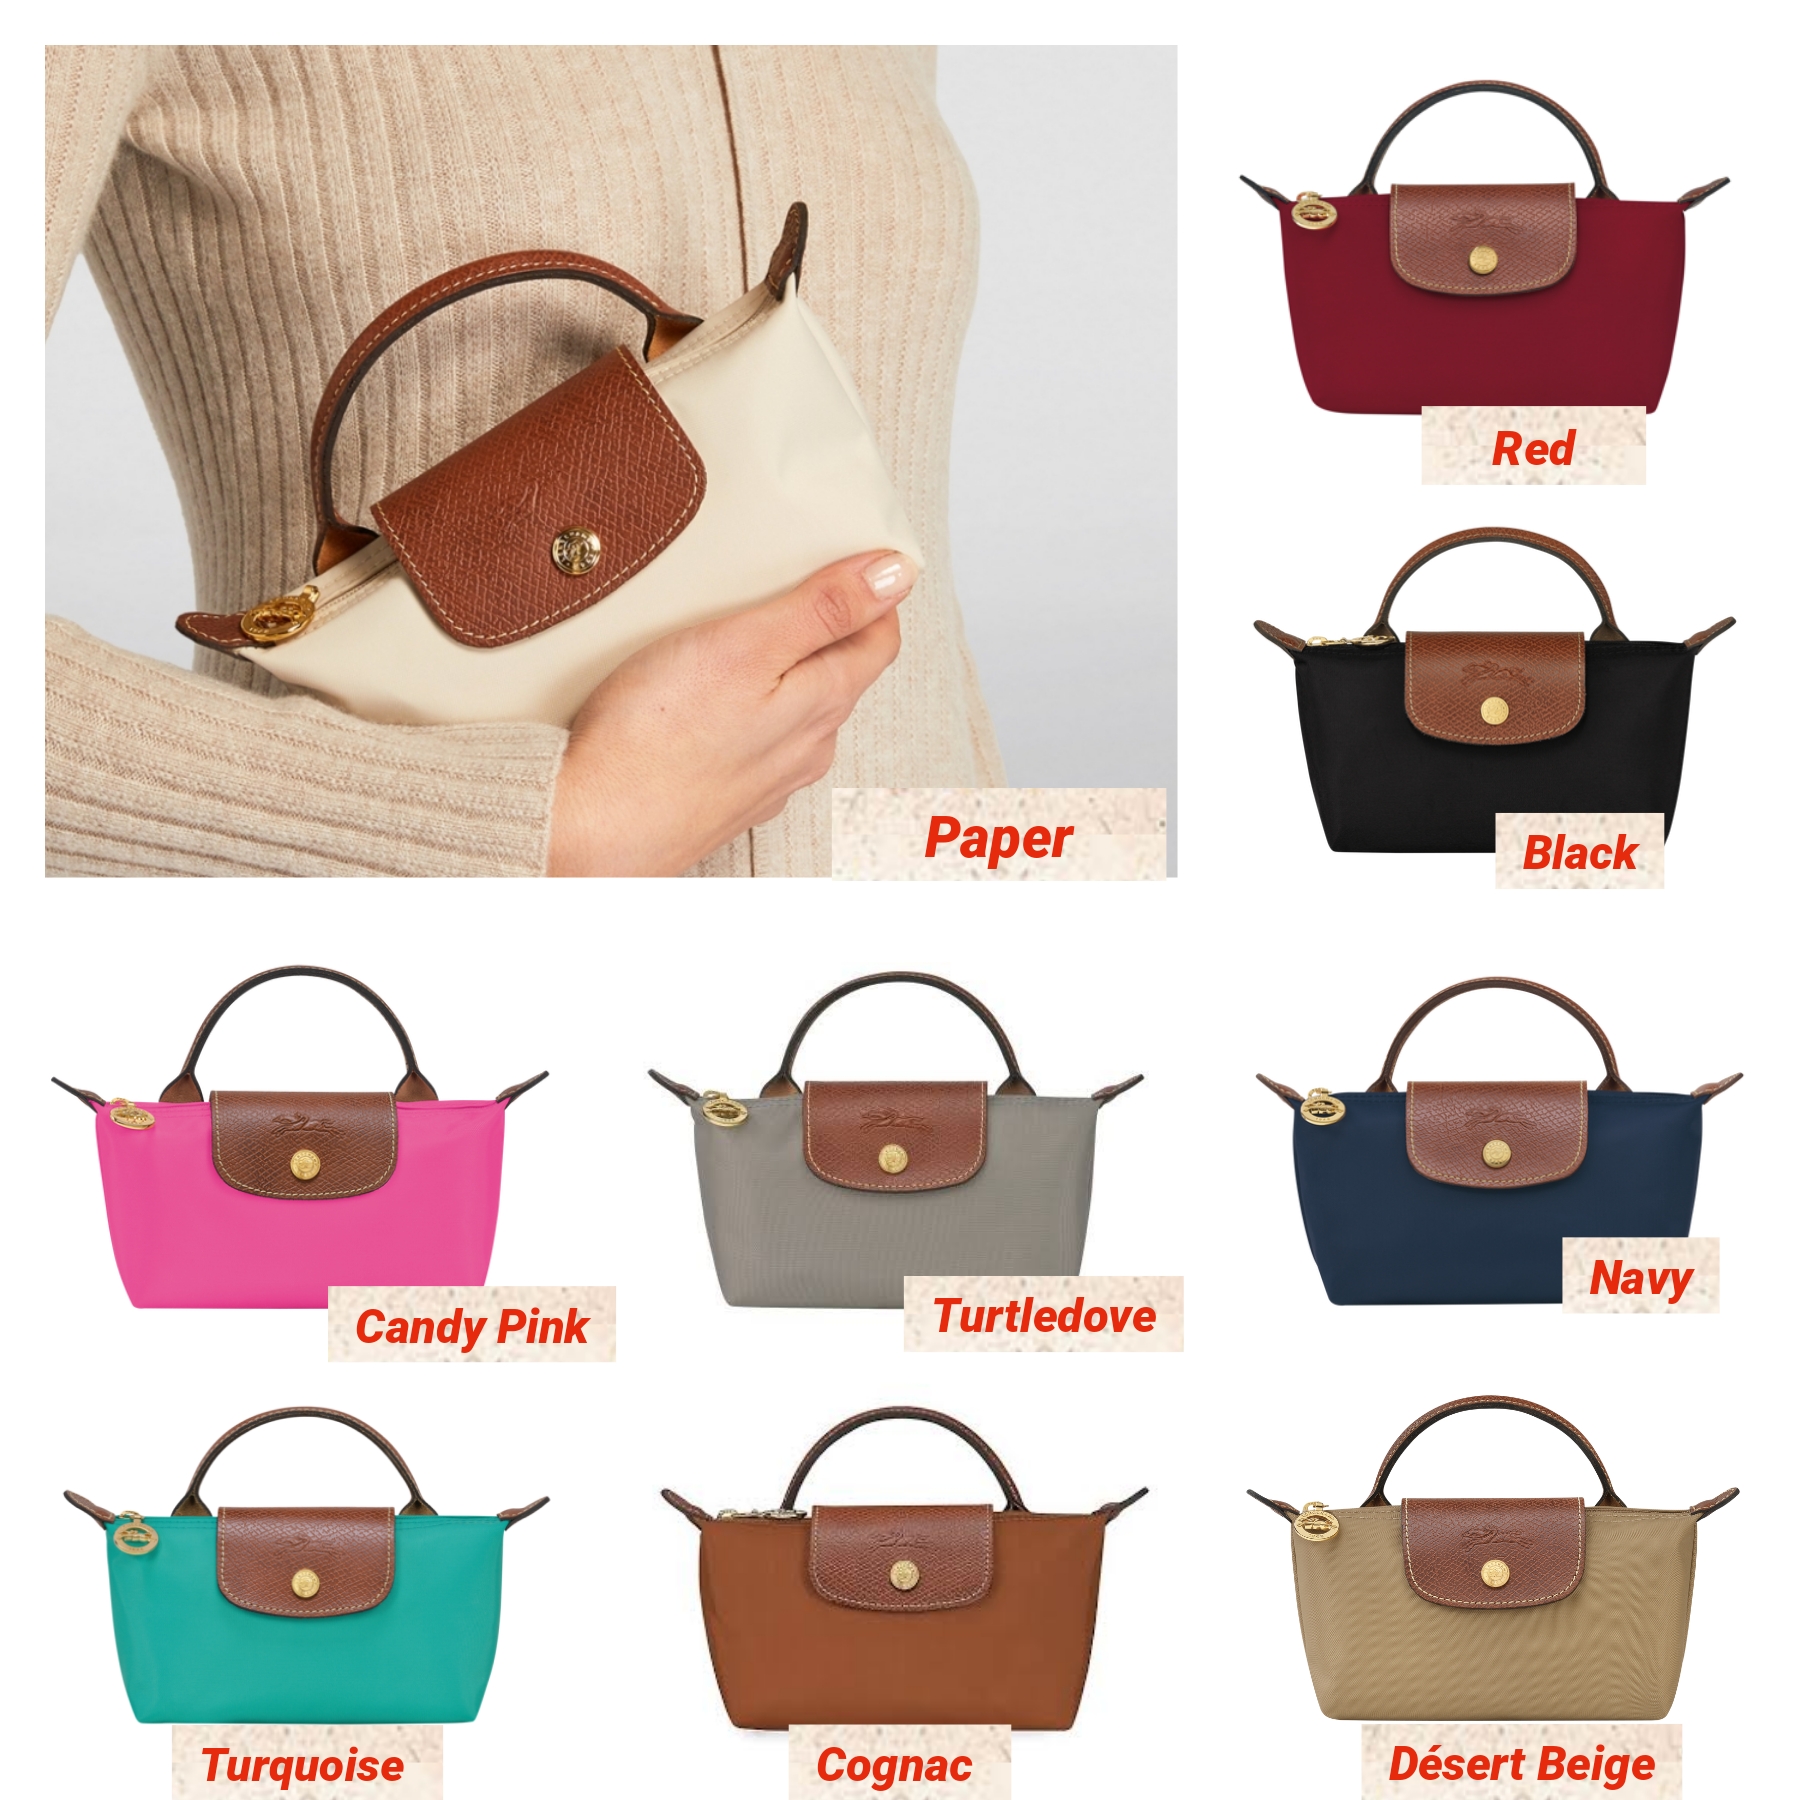 ✨LONGCHAMP - Mini pouch with handle สุดคิ้วท์💕✨, Gallery posted by  Kistaガン🌙✨